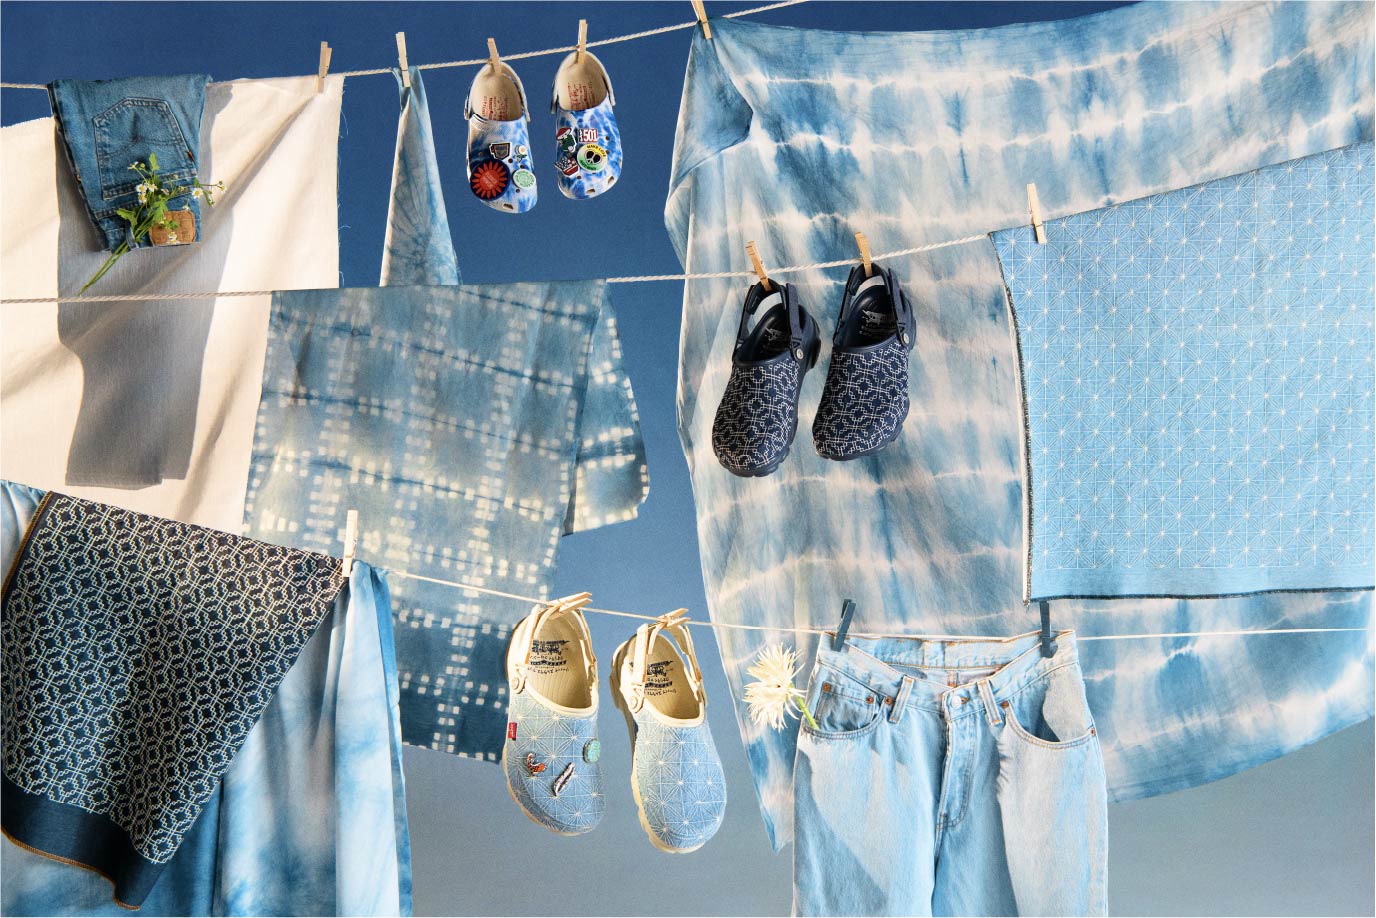 Three pairs of Levi's x CROCS shoes were hanging on the clothesline - Levi's Hong Kong